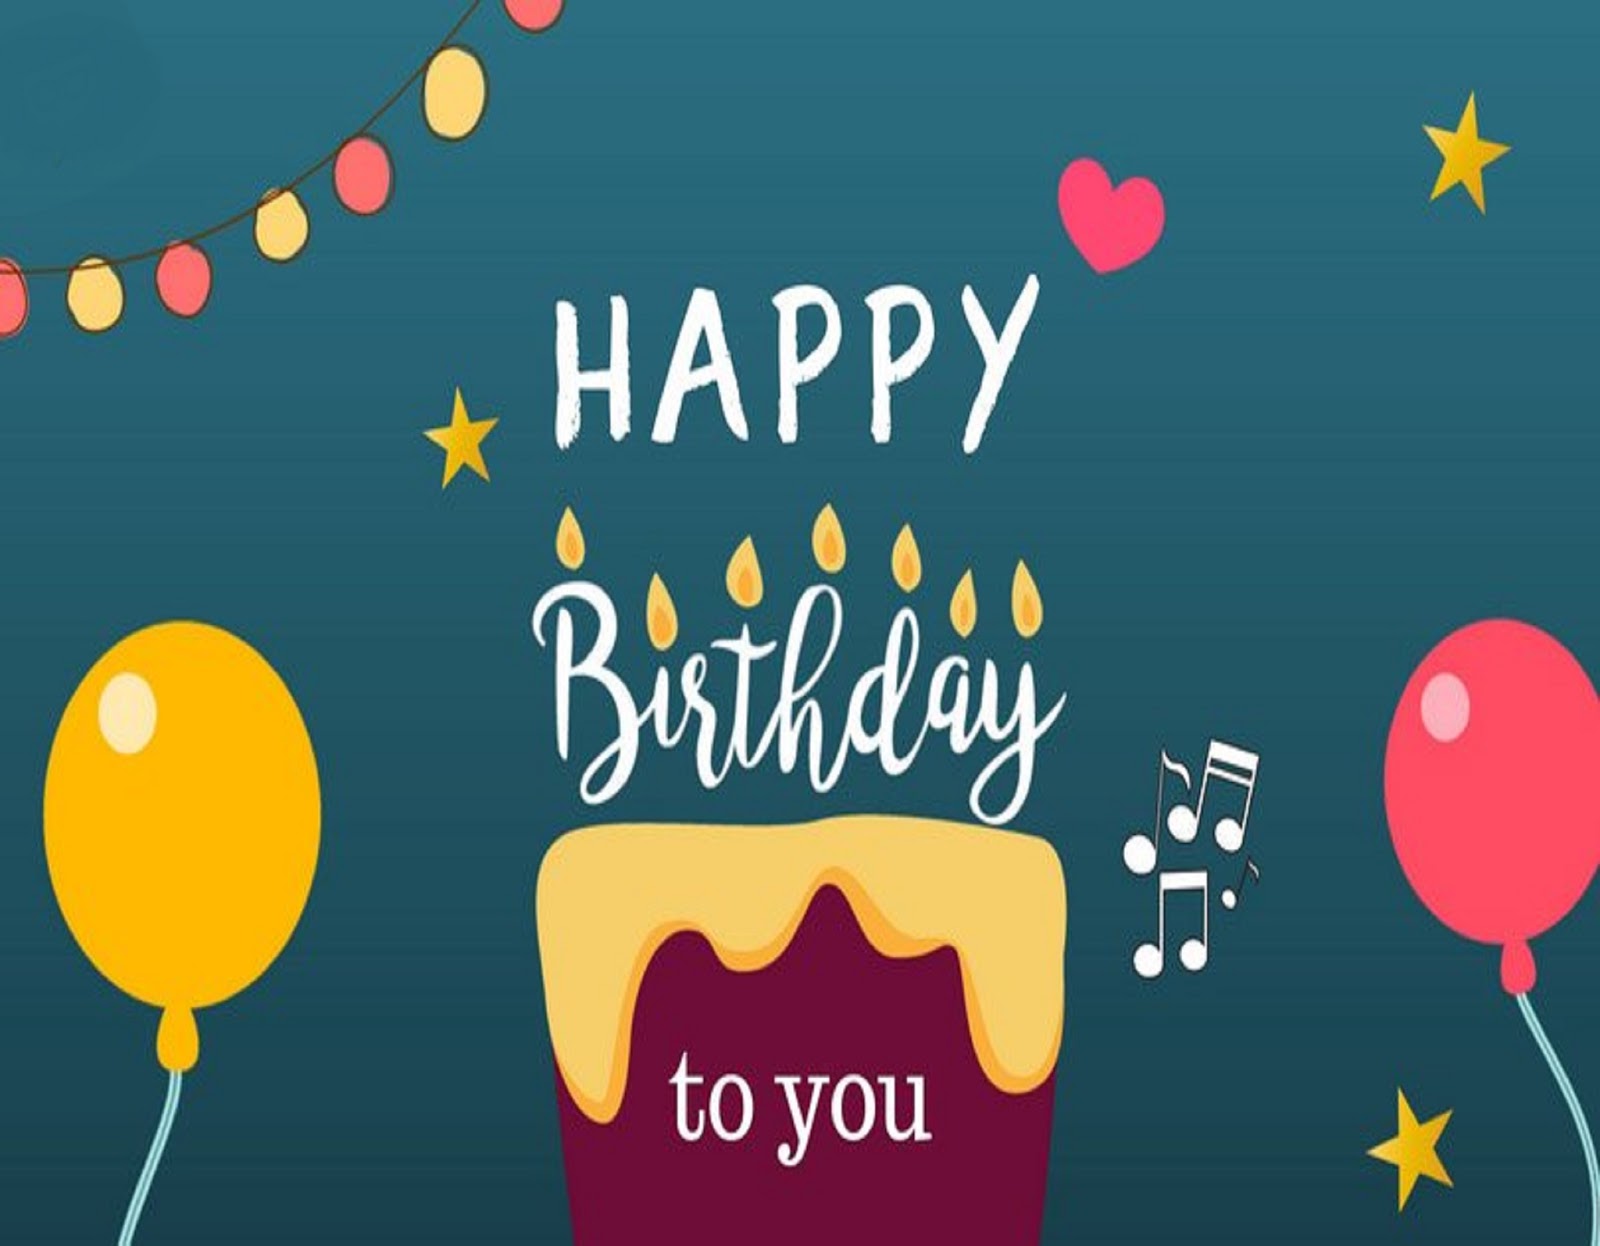 🎂🎈🎁🎈🎂 Birthday Text Messages For a Friend 🎂🎈🎁🎈🎂 | Tarjetitas